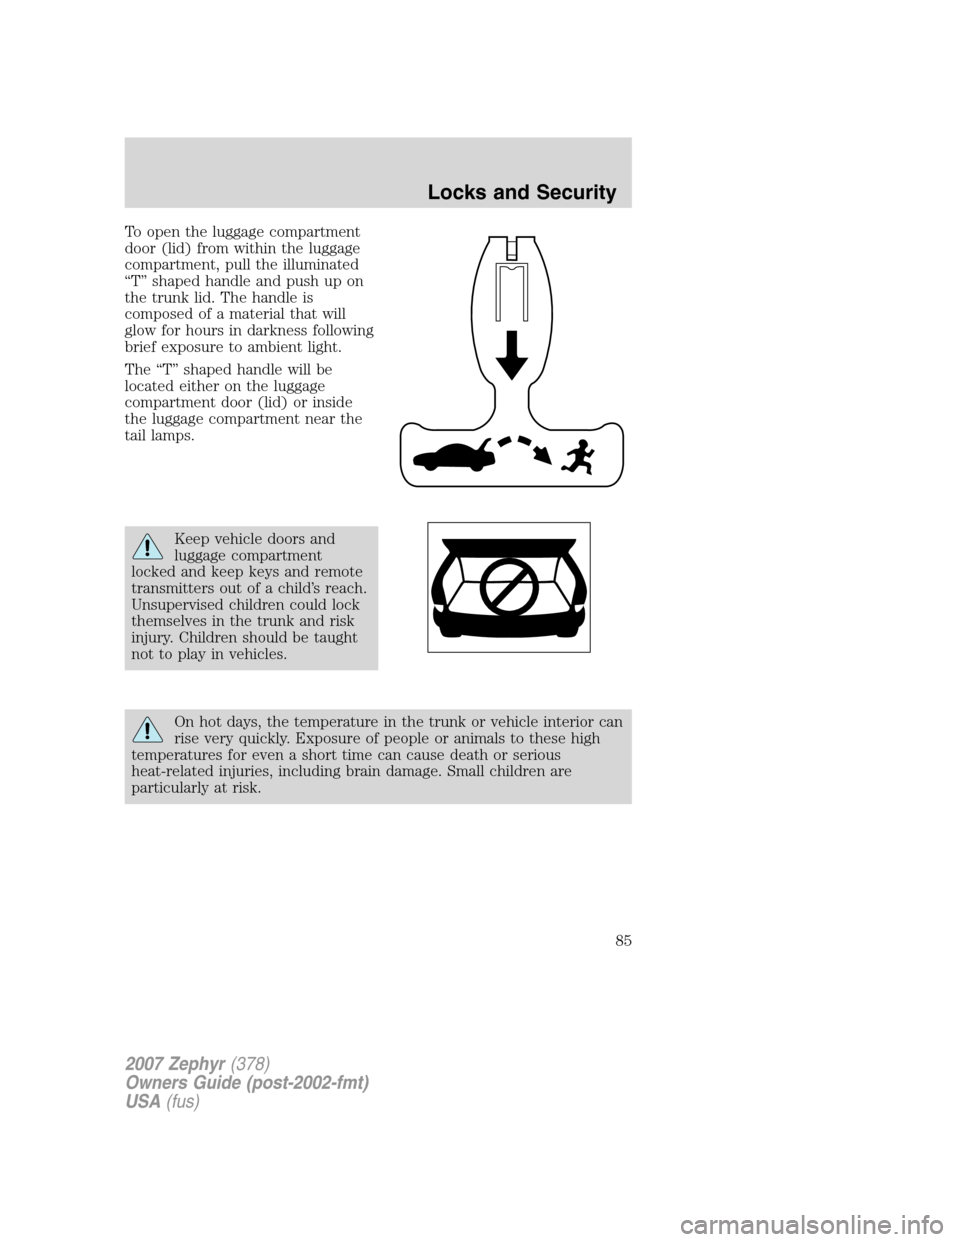 LINCOLN MKZ 2007  Owners Manual To open the luggage compartment
door (lid) from within the luggage
compartment, pull the illuminated
“T” shaped handle and push up on
the trunk lid. The handle is
composed of a material that will
